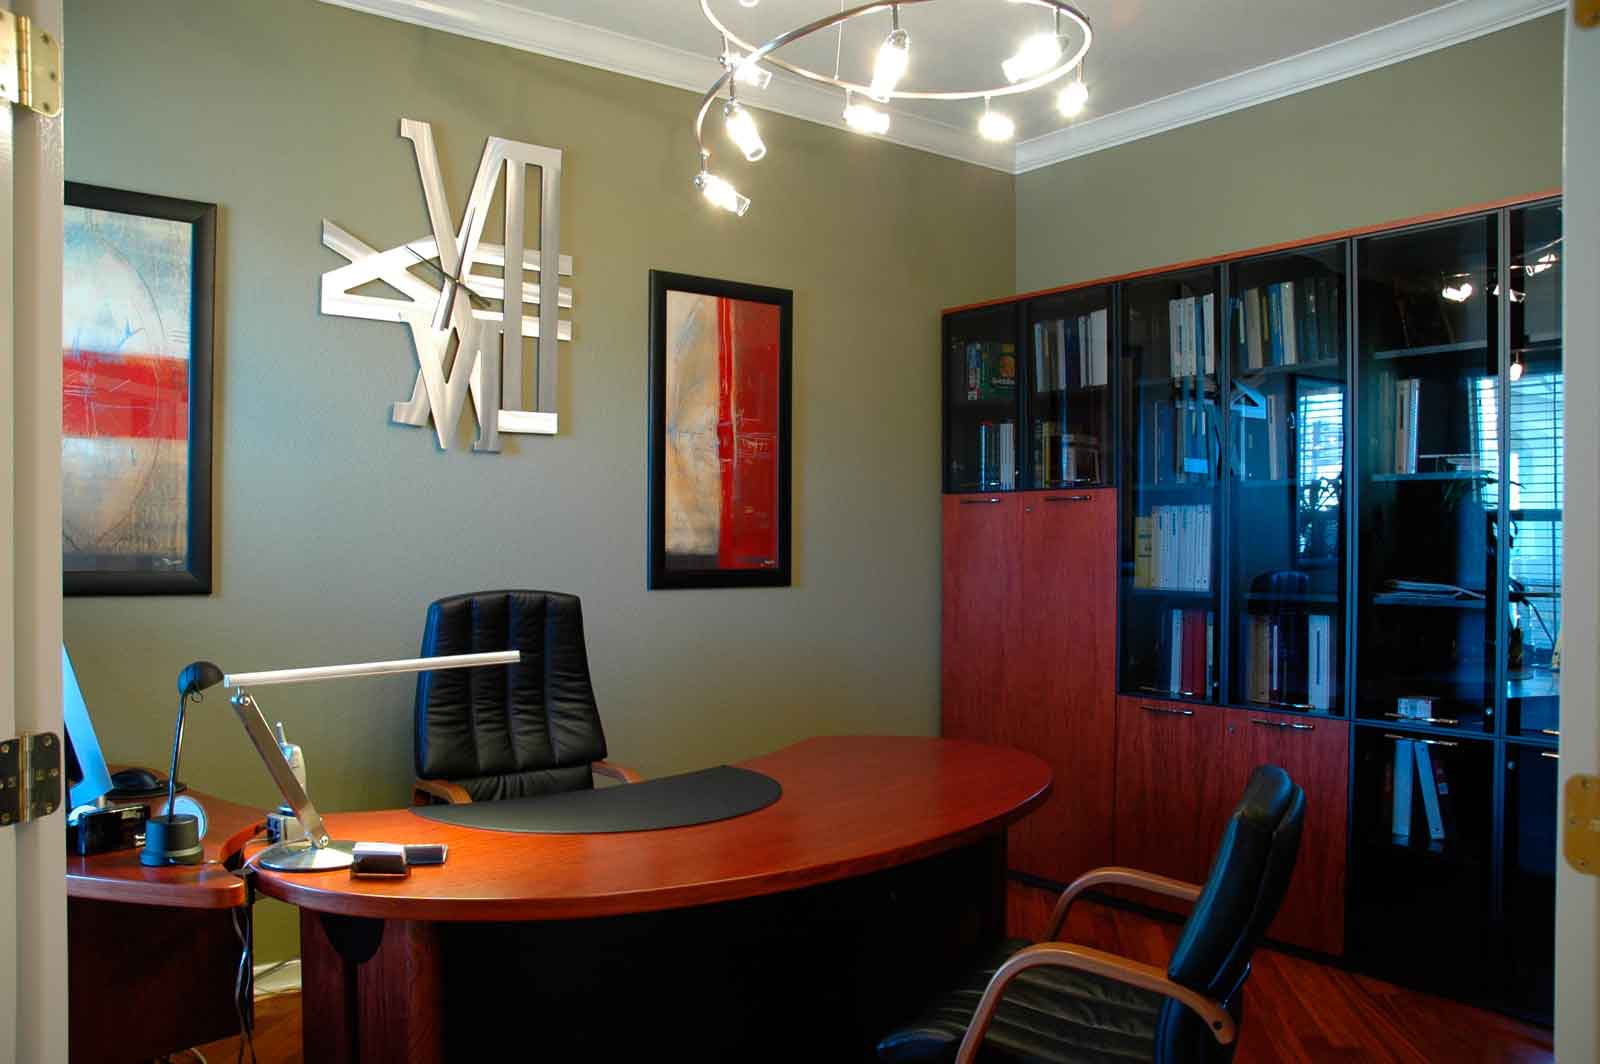 Office Design Modern Charming Small Office Design Decorated With Modern Office Furniture Using Leather Chair And Unique Chandelier Lighting Office Small Office Design In Lovely And Cheerful Nuance